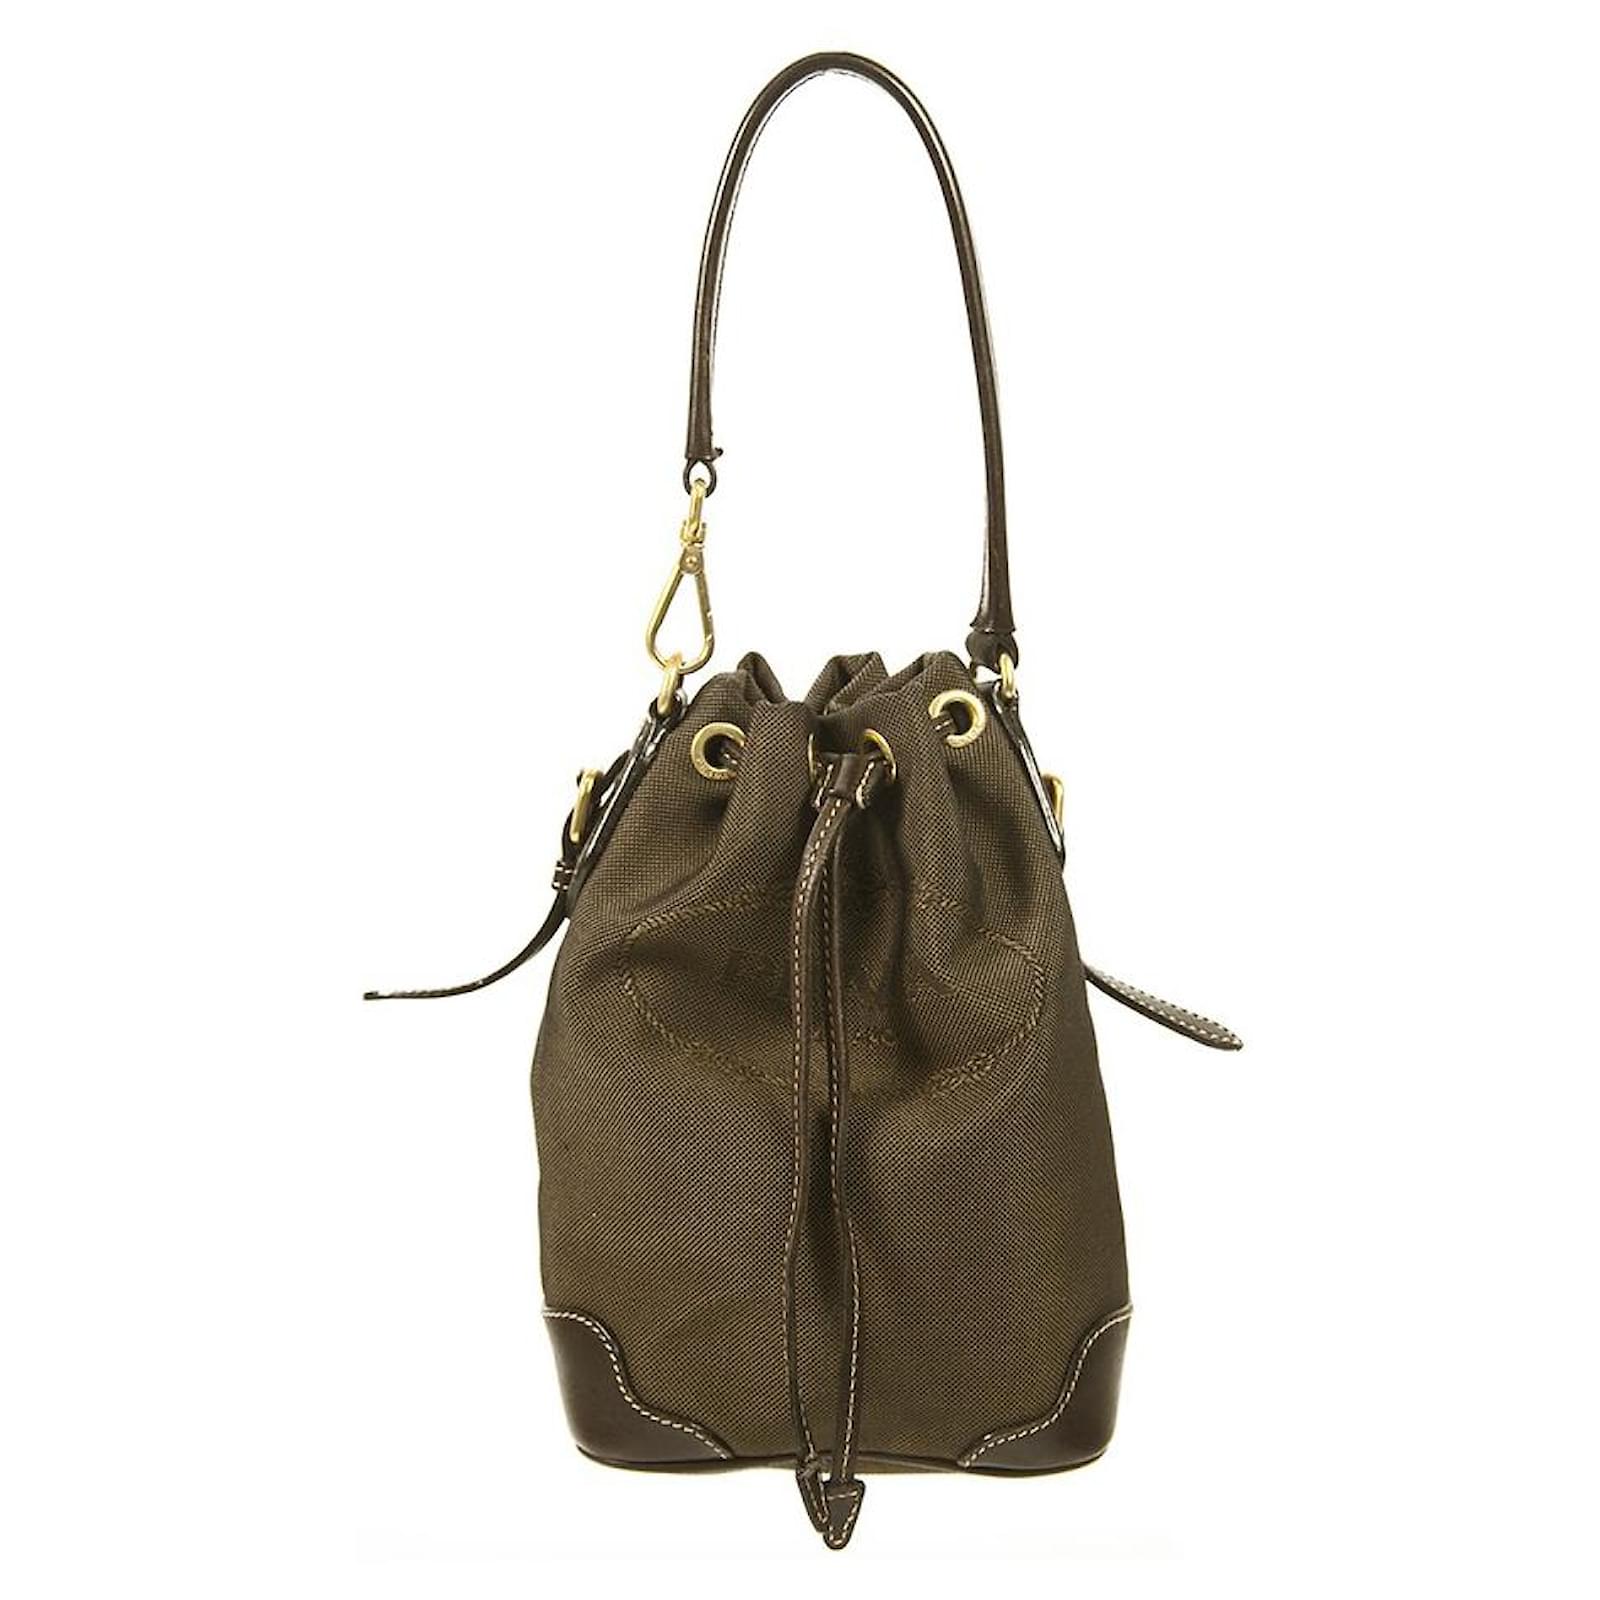 Prada brown fabric & leather drawstring top single handle pouch